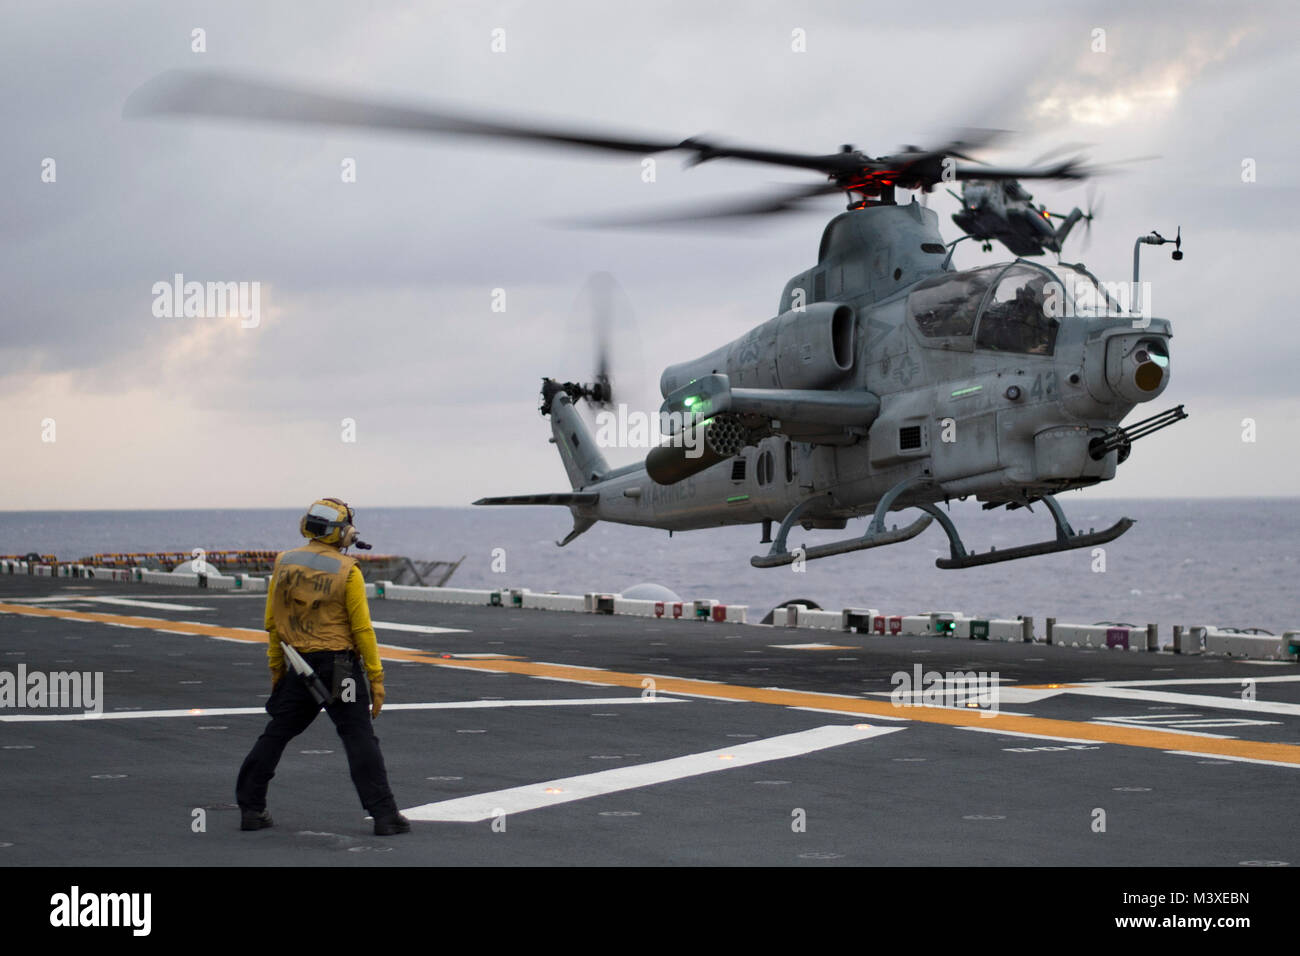 180204-N-XK809-047  PHILIPPINE SEA (Feb. 4, 2018) An AH-1Z Viper helicopter assigned to the 'Gunfighters' of Marine Light Attack Helicopter Squadron (HMLA) 369 lands on the flight deck of the amphibious assault ship USS Bonhomme Richard (LHD 6). Bonhomme Richard is operating in the Indo-Asia-Pacific region as part of a regularly scheduled patrol and provides a rapid-response capability in the event of a regional contingency or natural disaster. (U.S. Navy photo by Mass Communication Specialist 2nd Class William Sykes/Released) Stock Photo